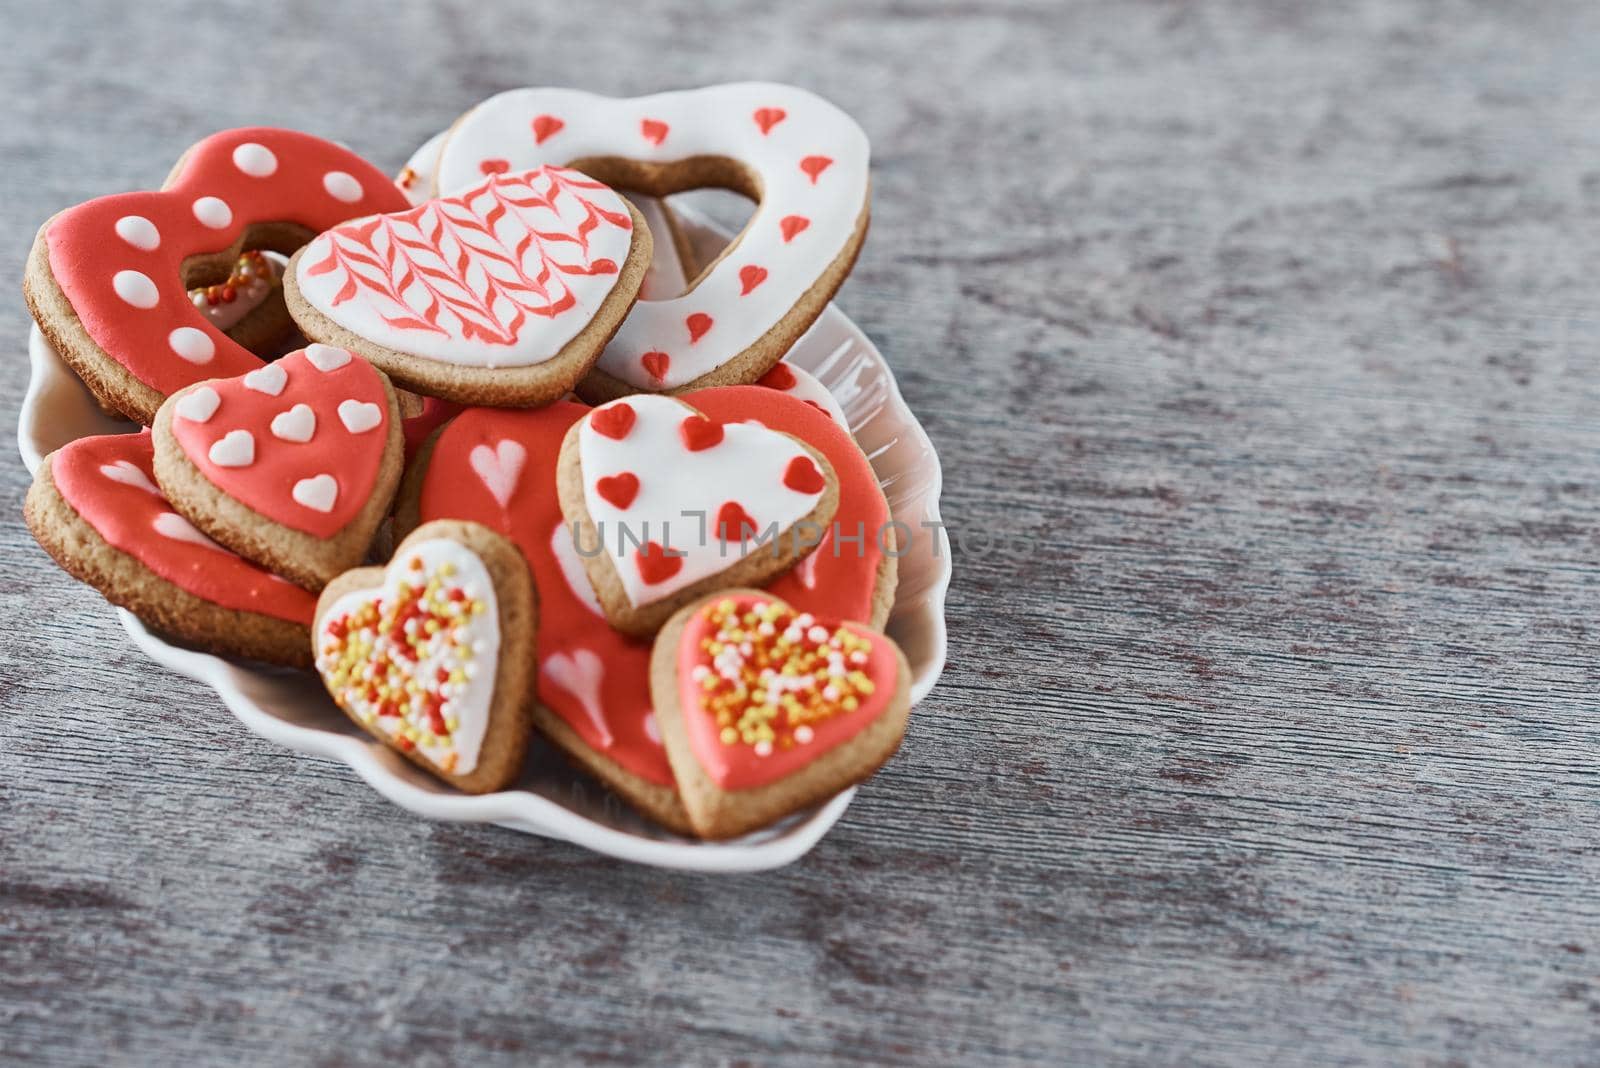 Decorated heart shape cookies in plate on gray background. Valentines Day food concept